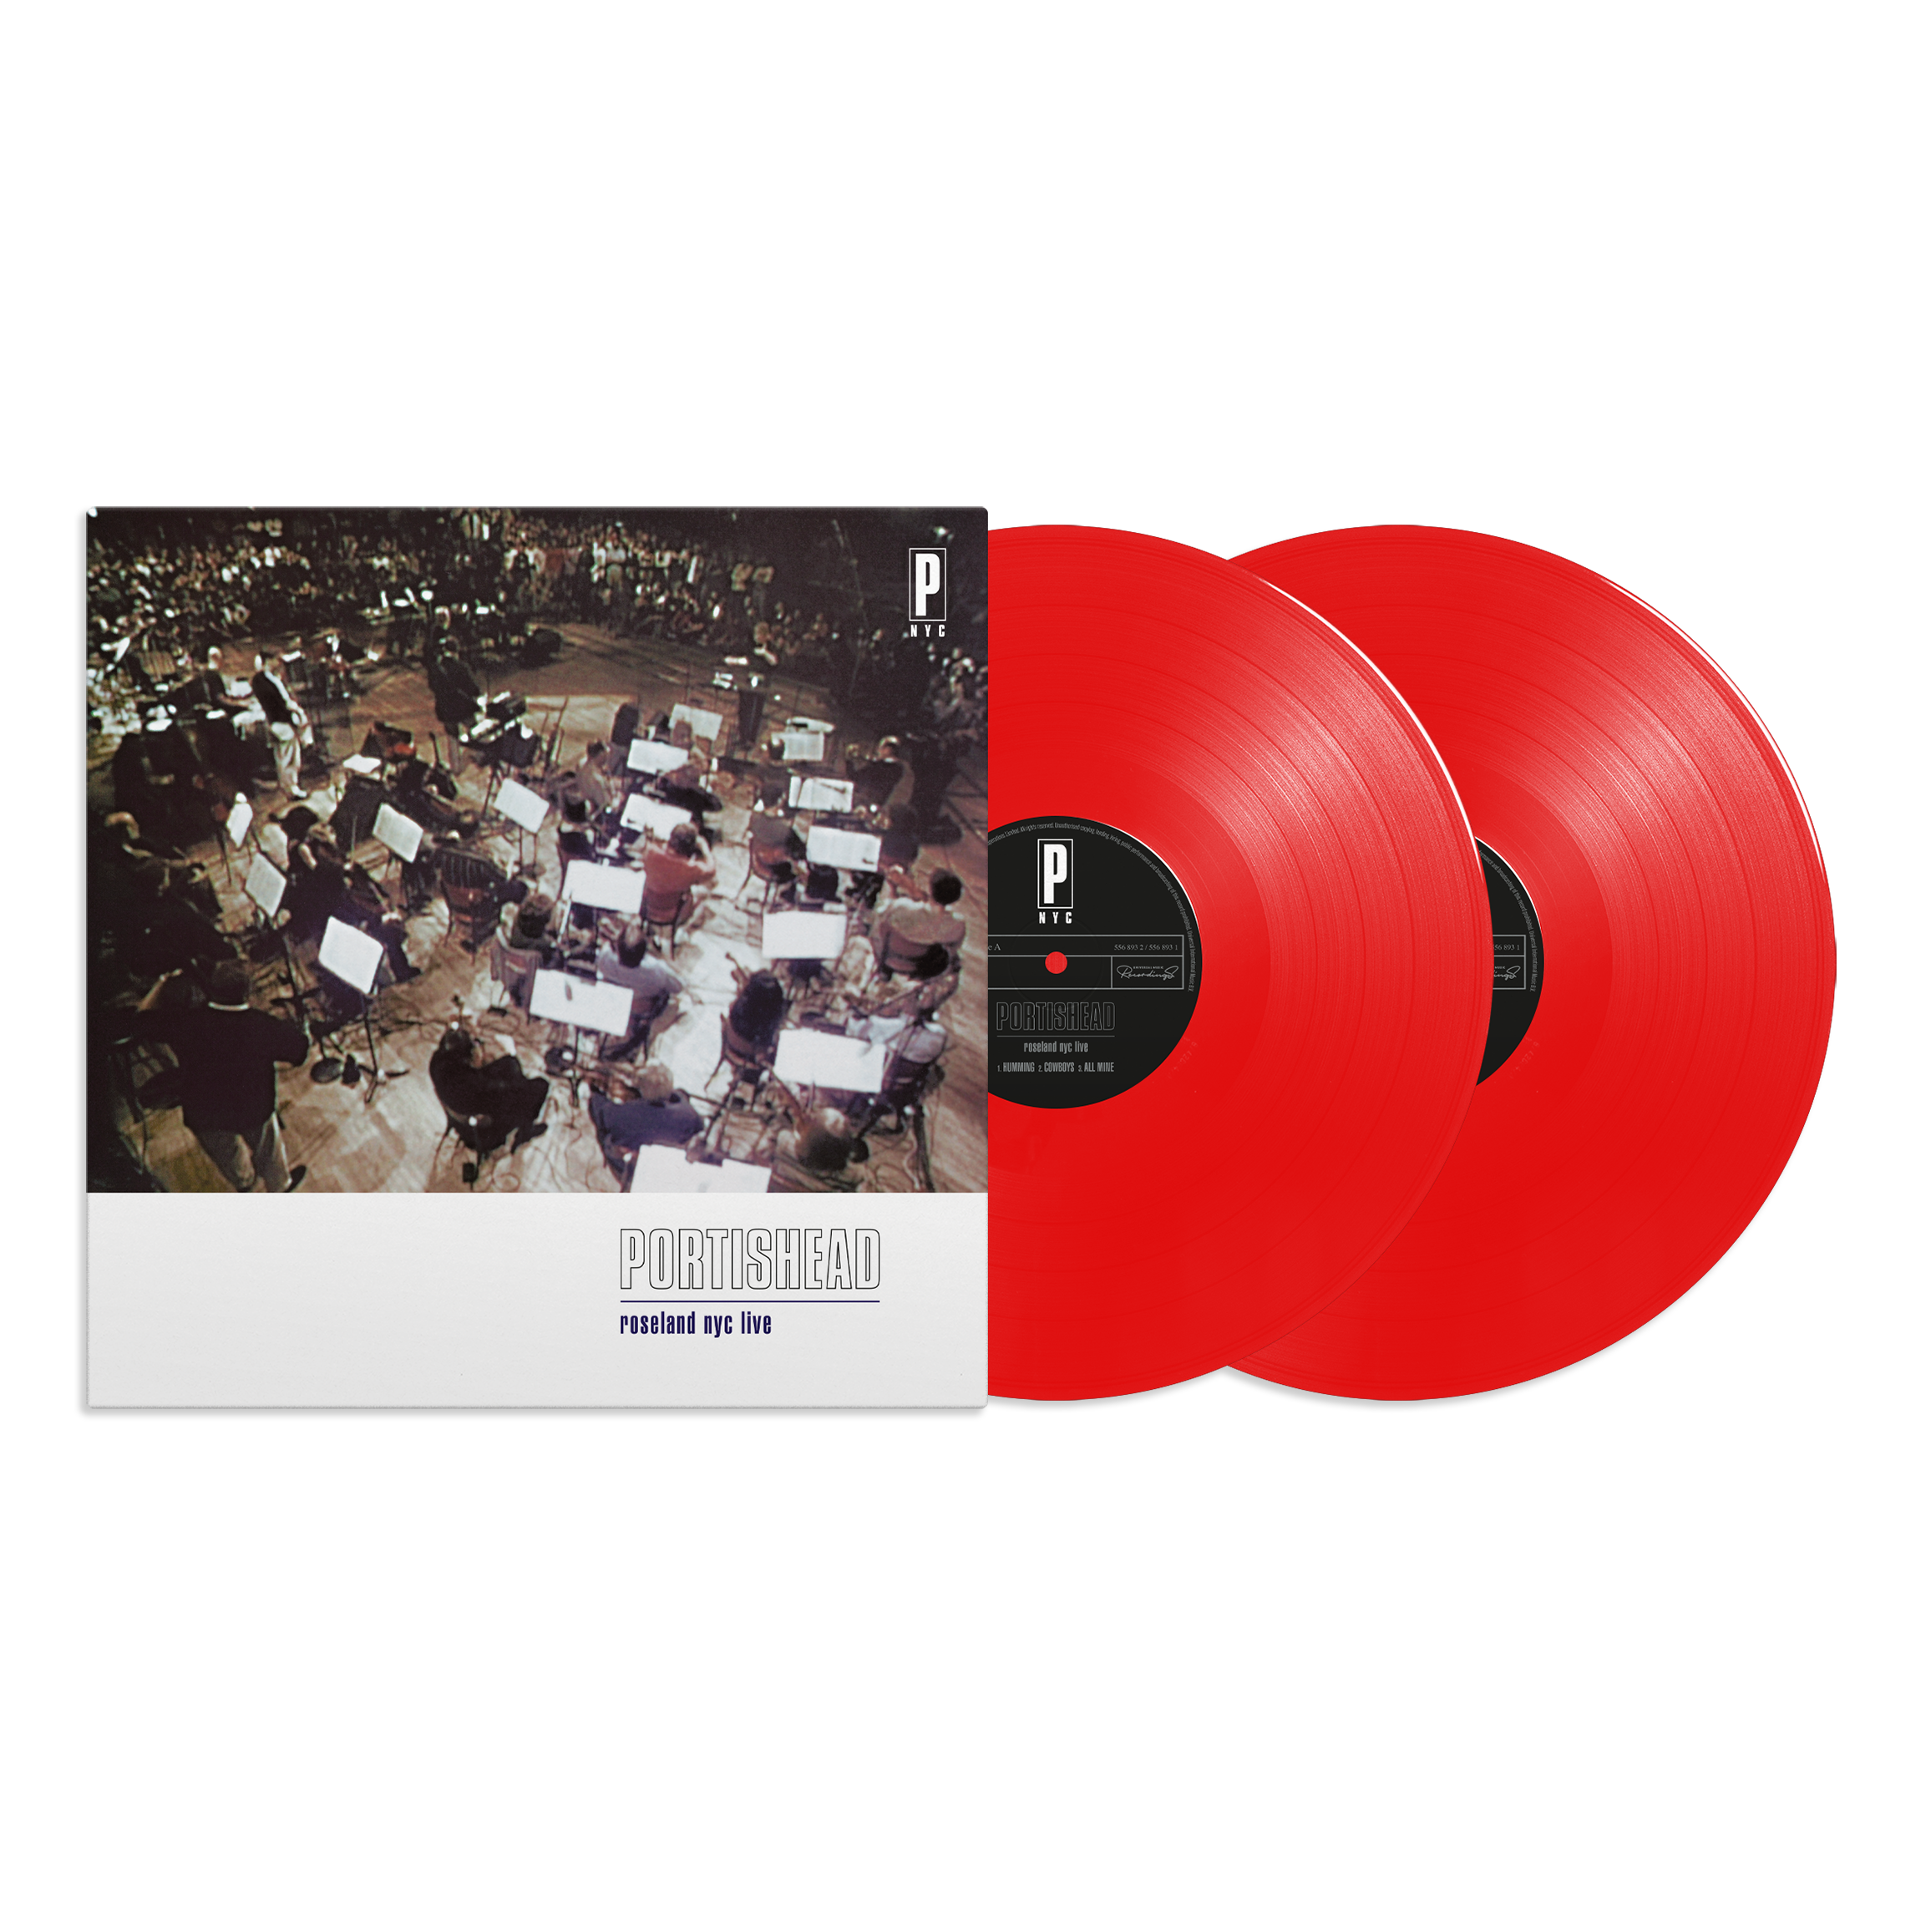 Portishead - Roseland NYC Live (25th Anniversary Edition): Limited Red Vinyl 2LP.